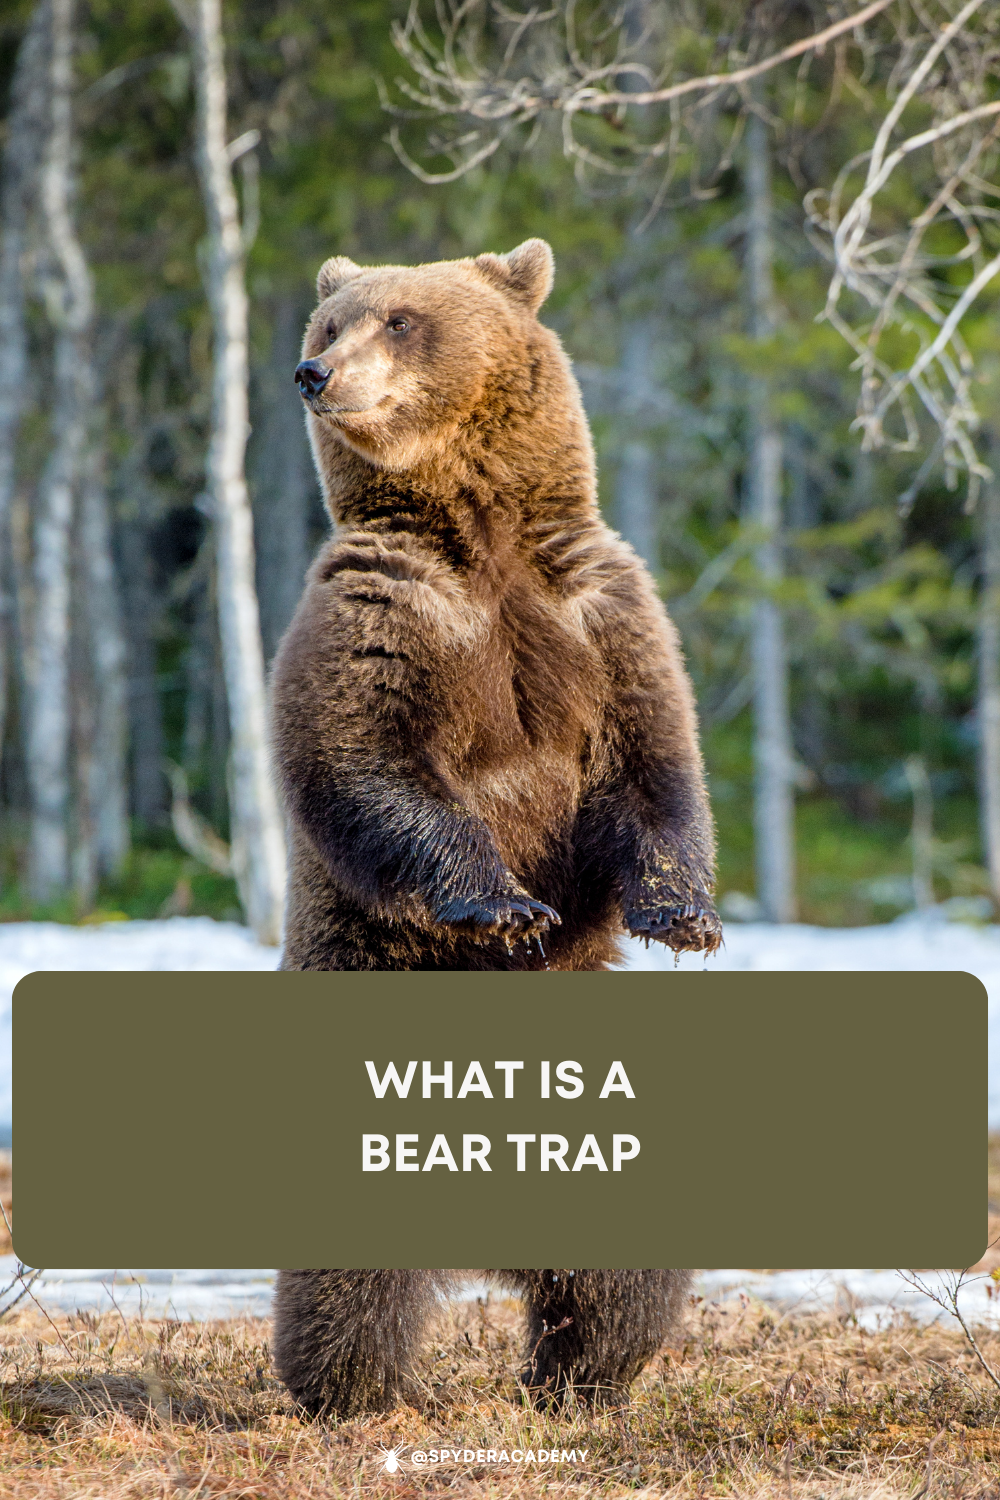 A Bear Trap is a deceptive market scenario where prices appear to be entering a bearish trend, enticing traders to short or sell. Just as despair sets in, the market reverses, catching those who fell for the trap off guard. It's a tale of false signals and unexpected turns.